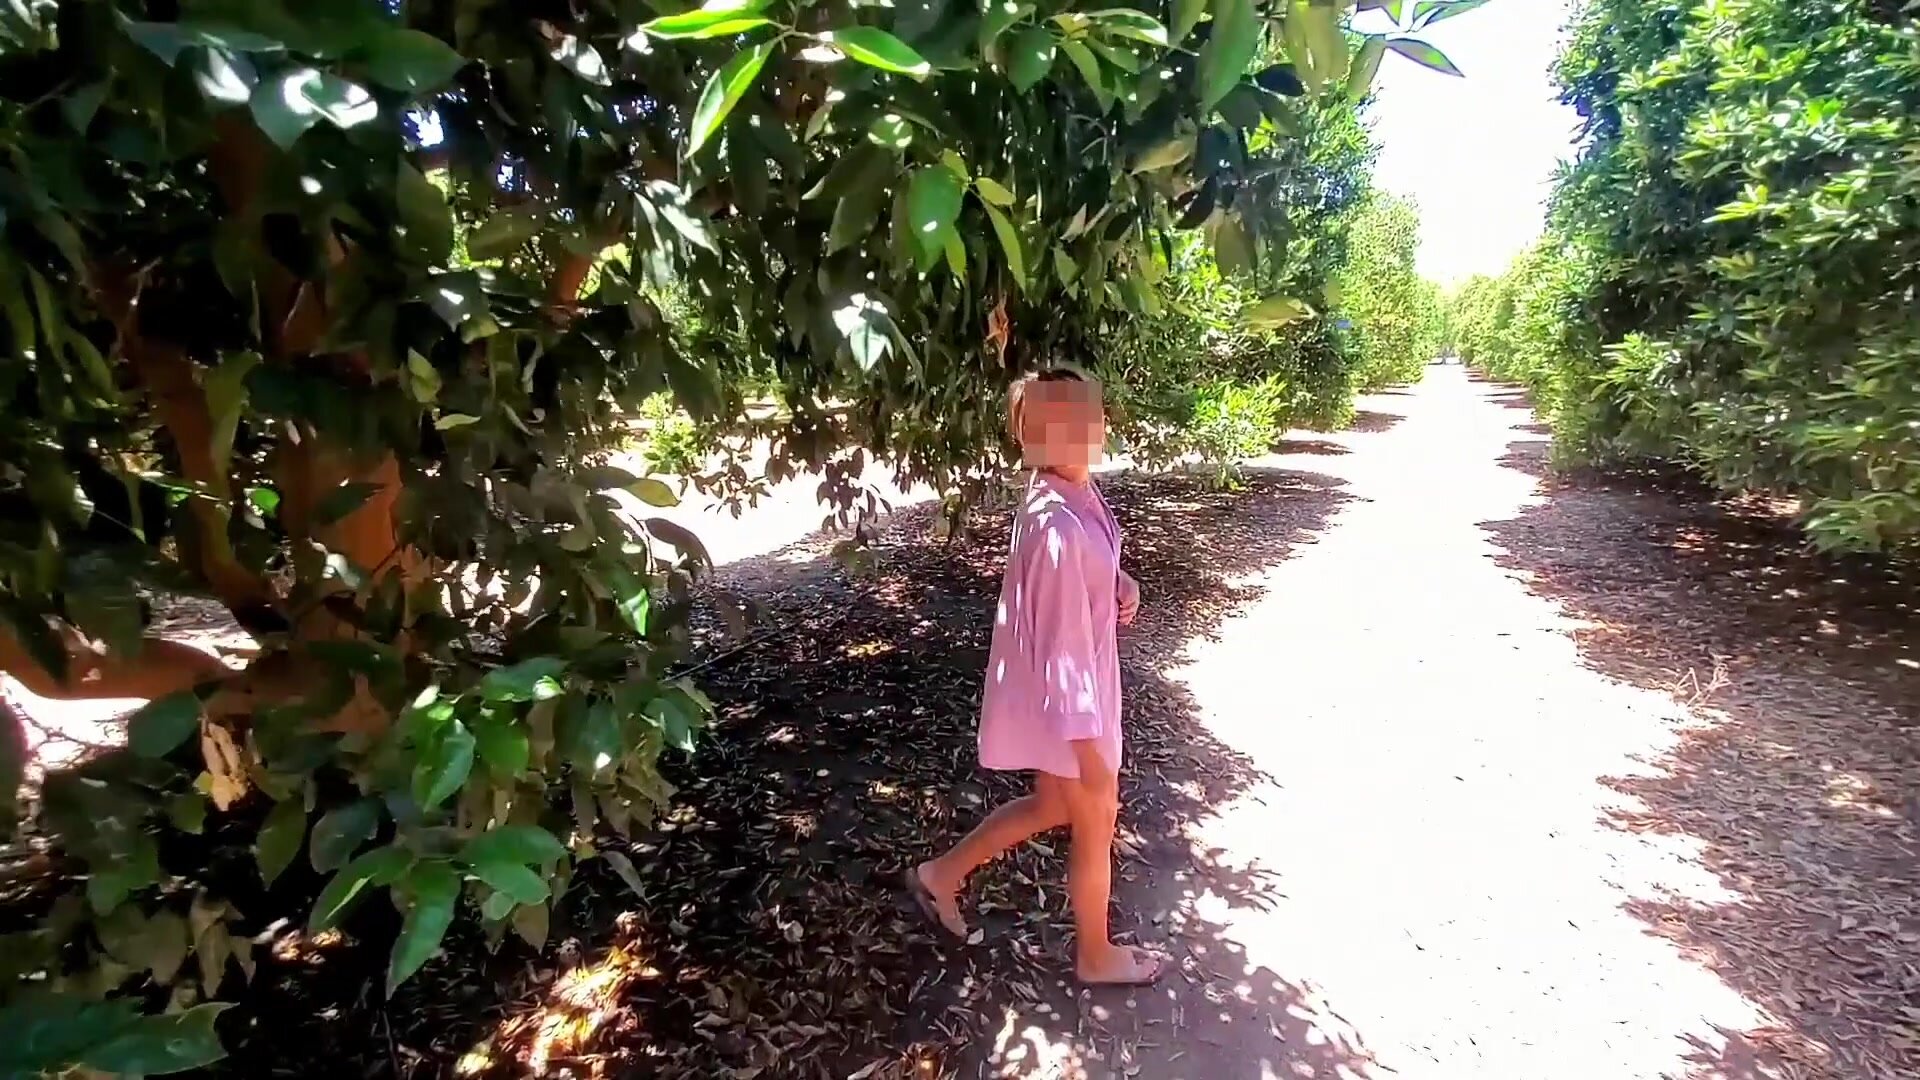 I'm walking naked through the orchard while cars drive by!